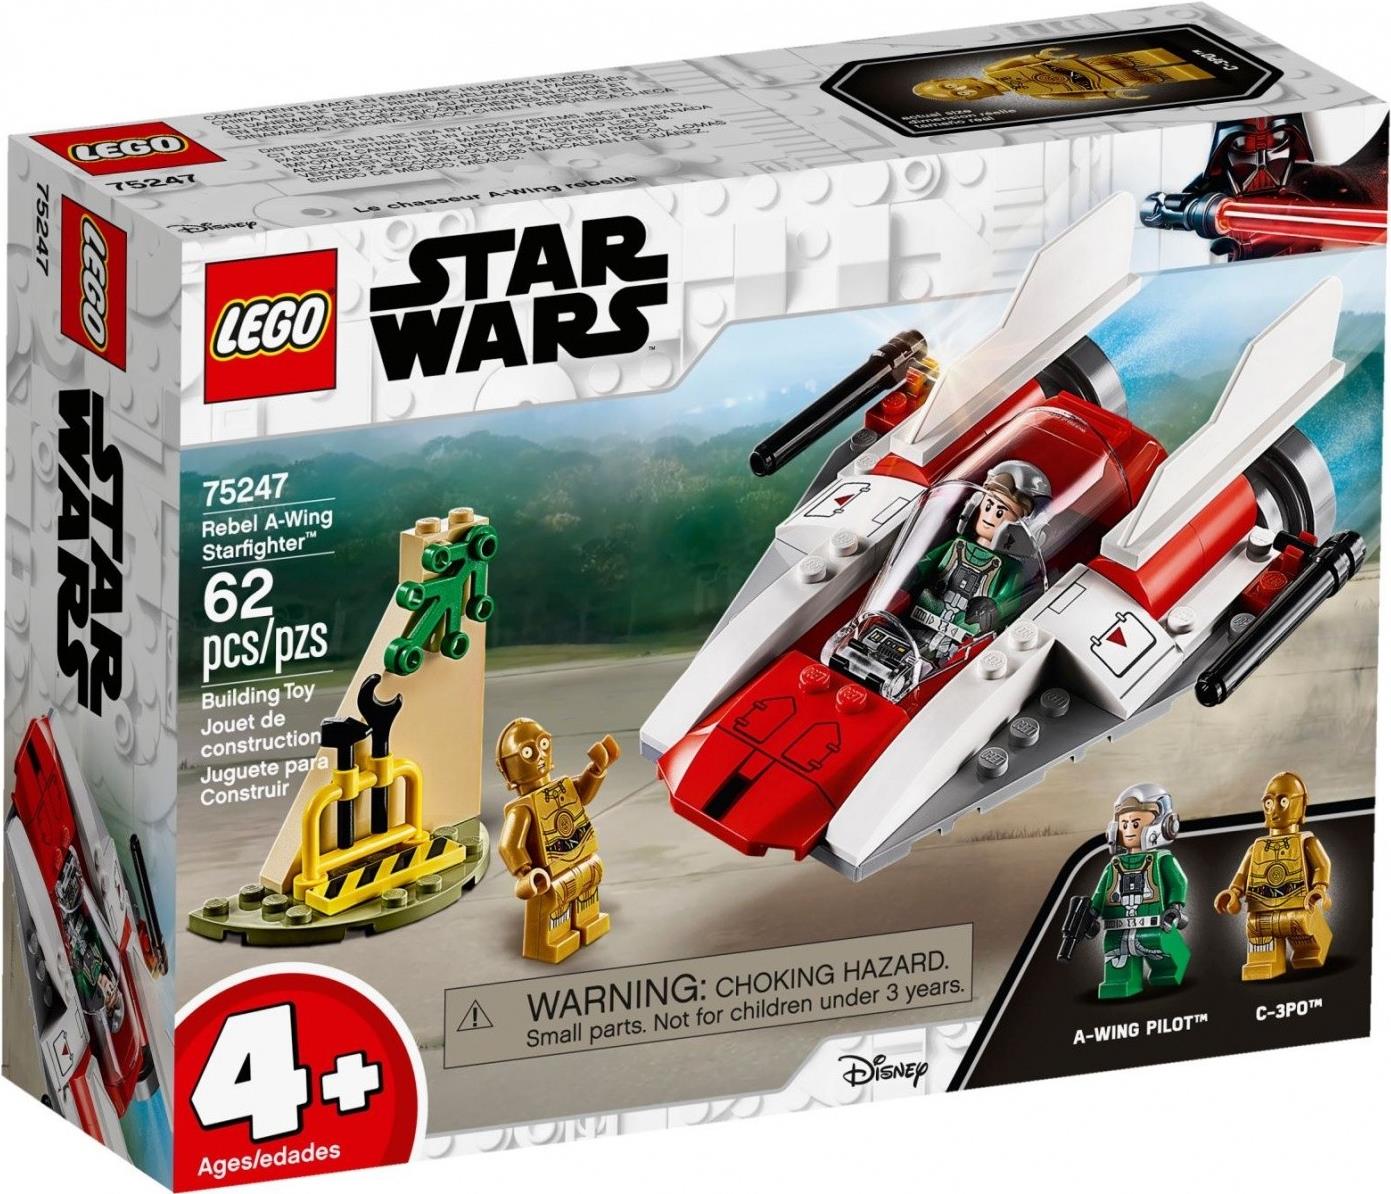 LEGO Star Wars 75247 A-Wing Starfighter (4+) (75247)